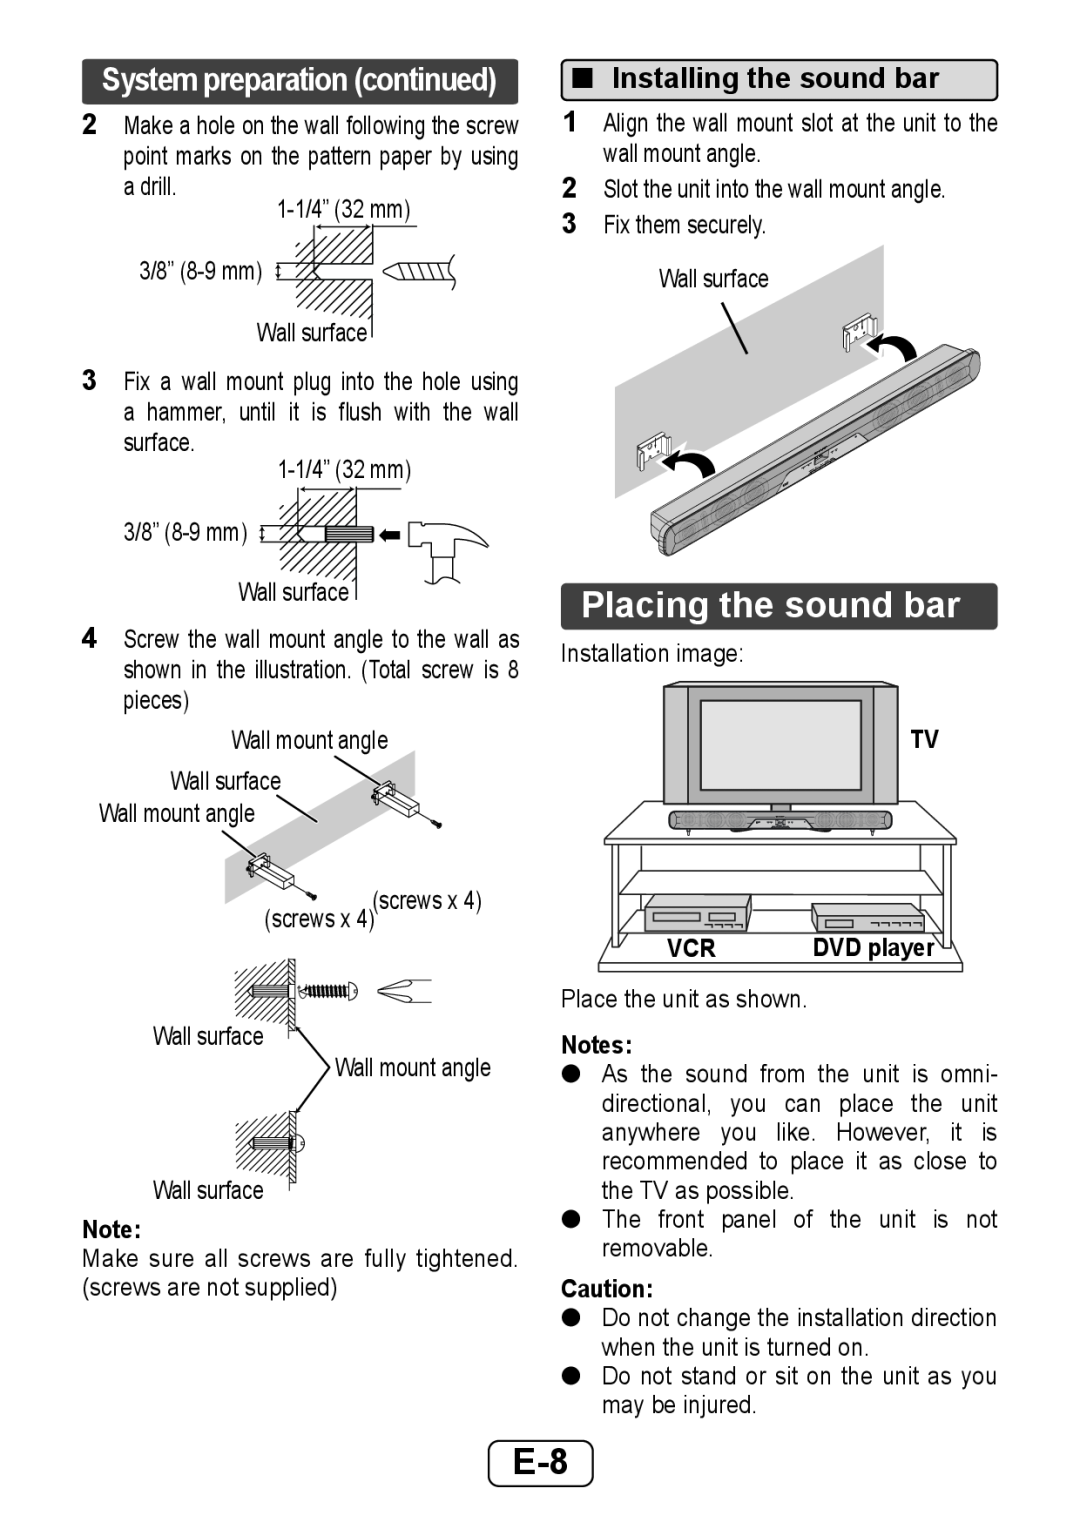 Sharp HTSB250 operation manual Placing the sound bar, Installing the sound bar, System preparation continued 